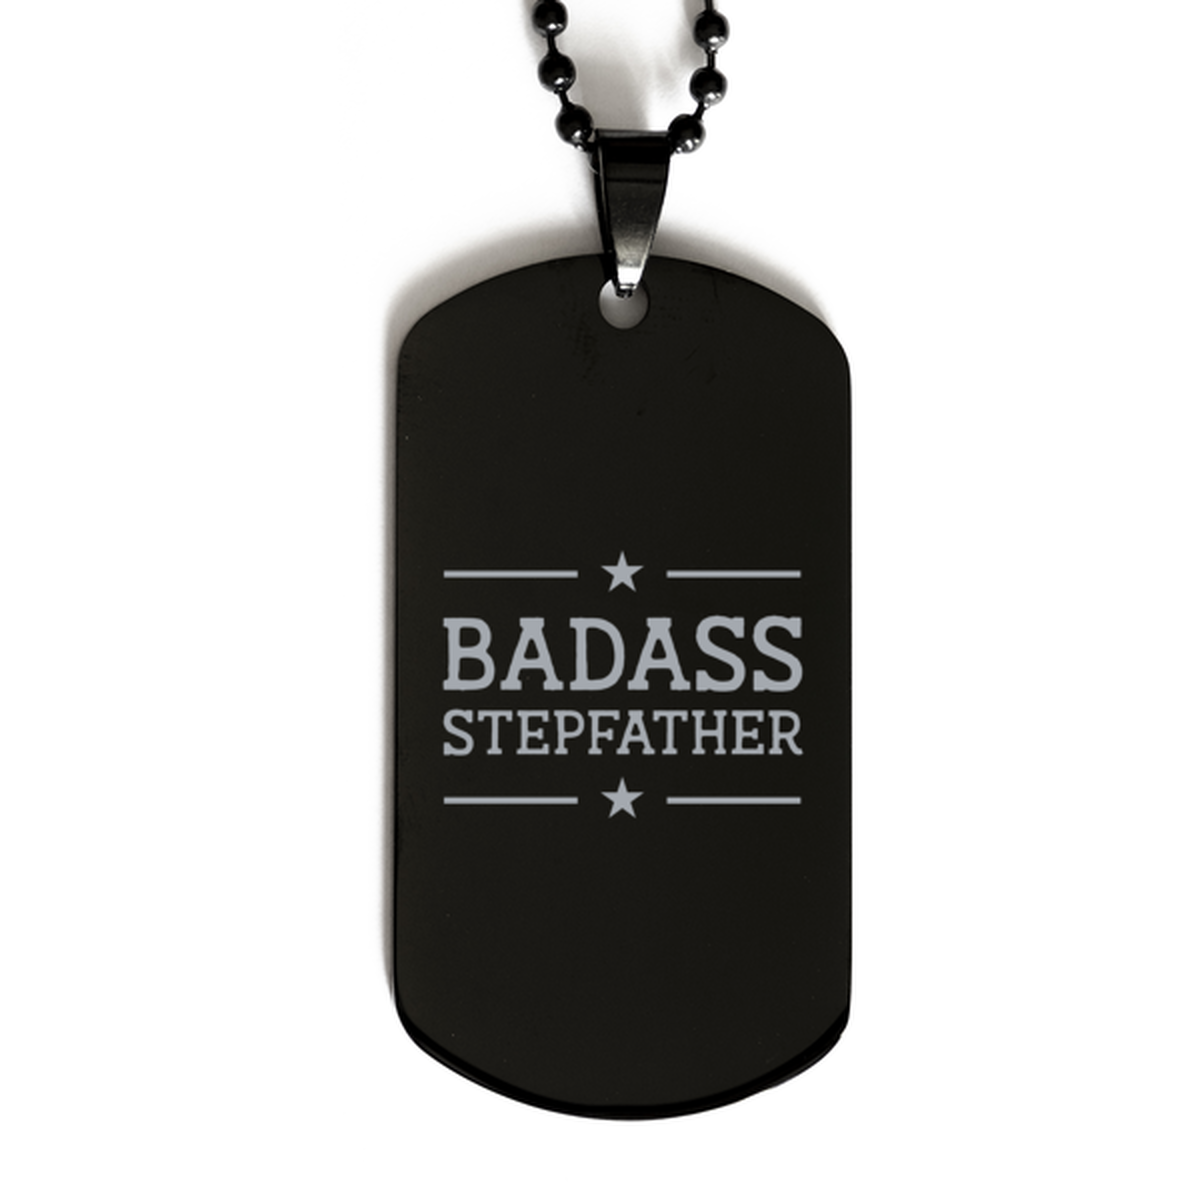 Stepfather Black Dog Tag, Badass Stepfather, Funny Family Gifts  Necklace For Stepfather From Son Daughter